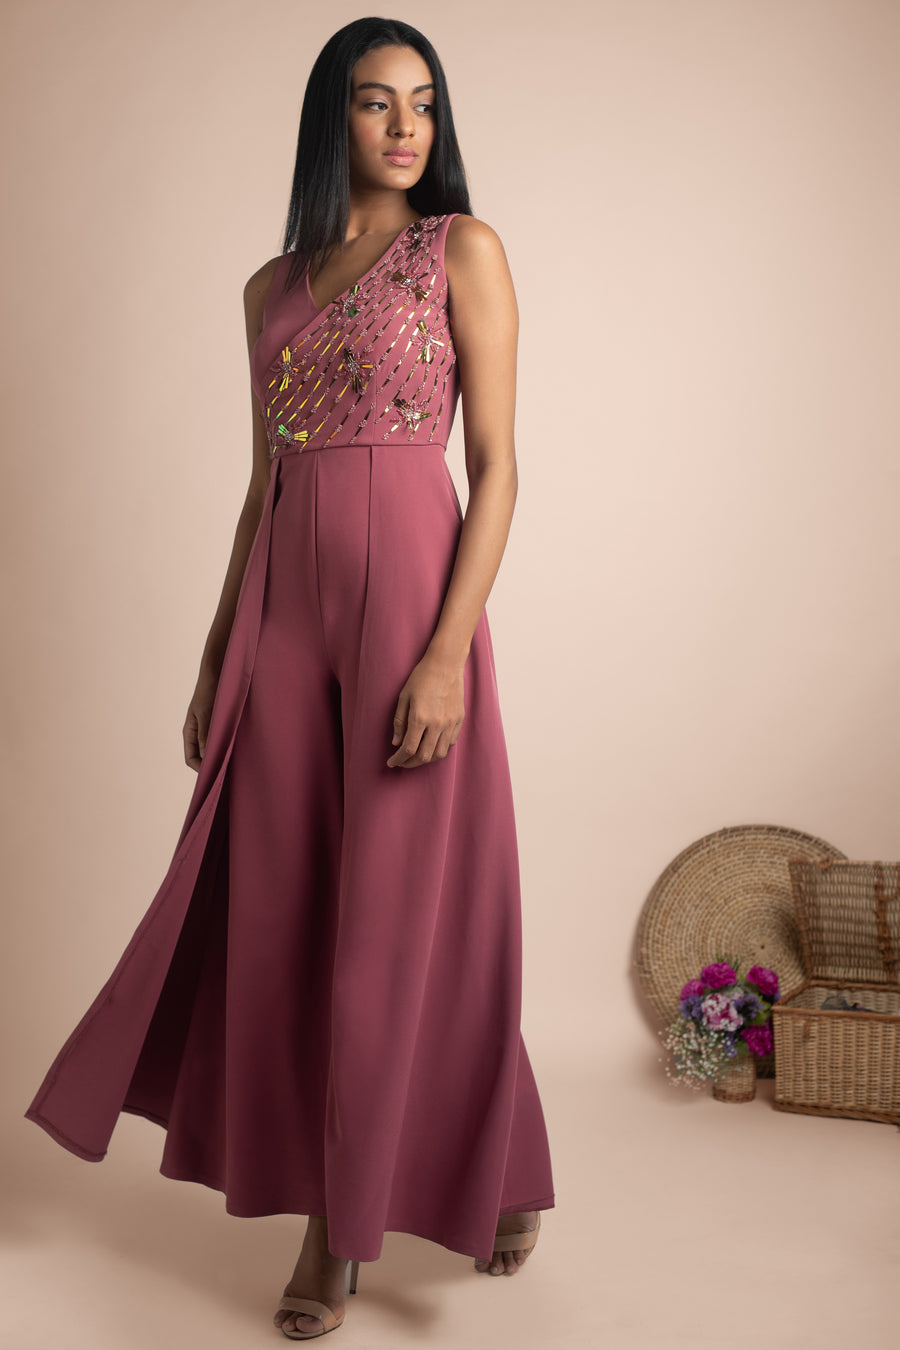 Mehak Murpana | Jumpsuit Gown | Stylish formal and party wear.